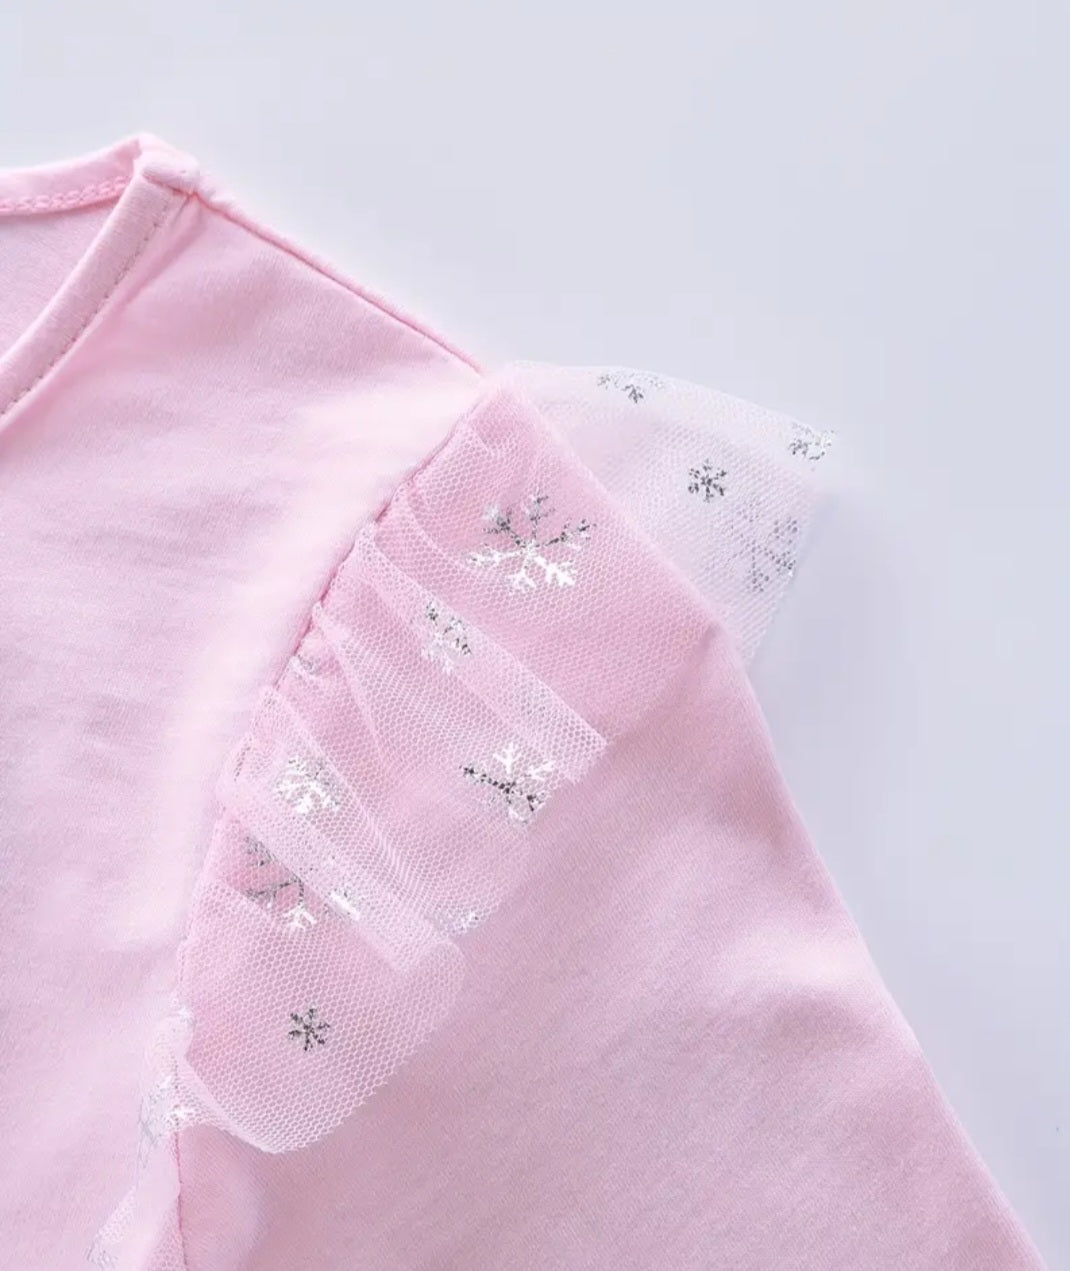 Pink Snow Princess Dress with Embroidered Snowflake